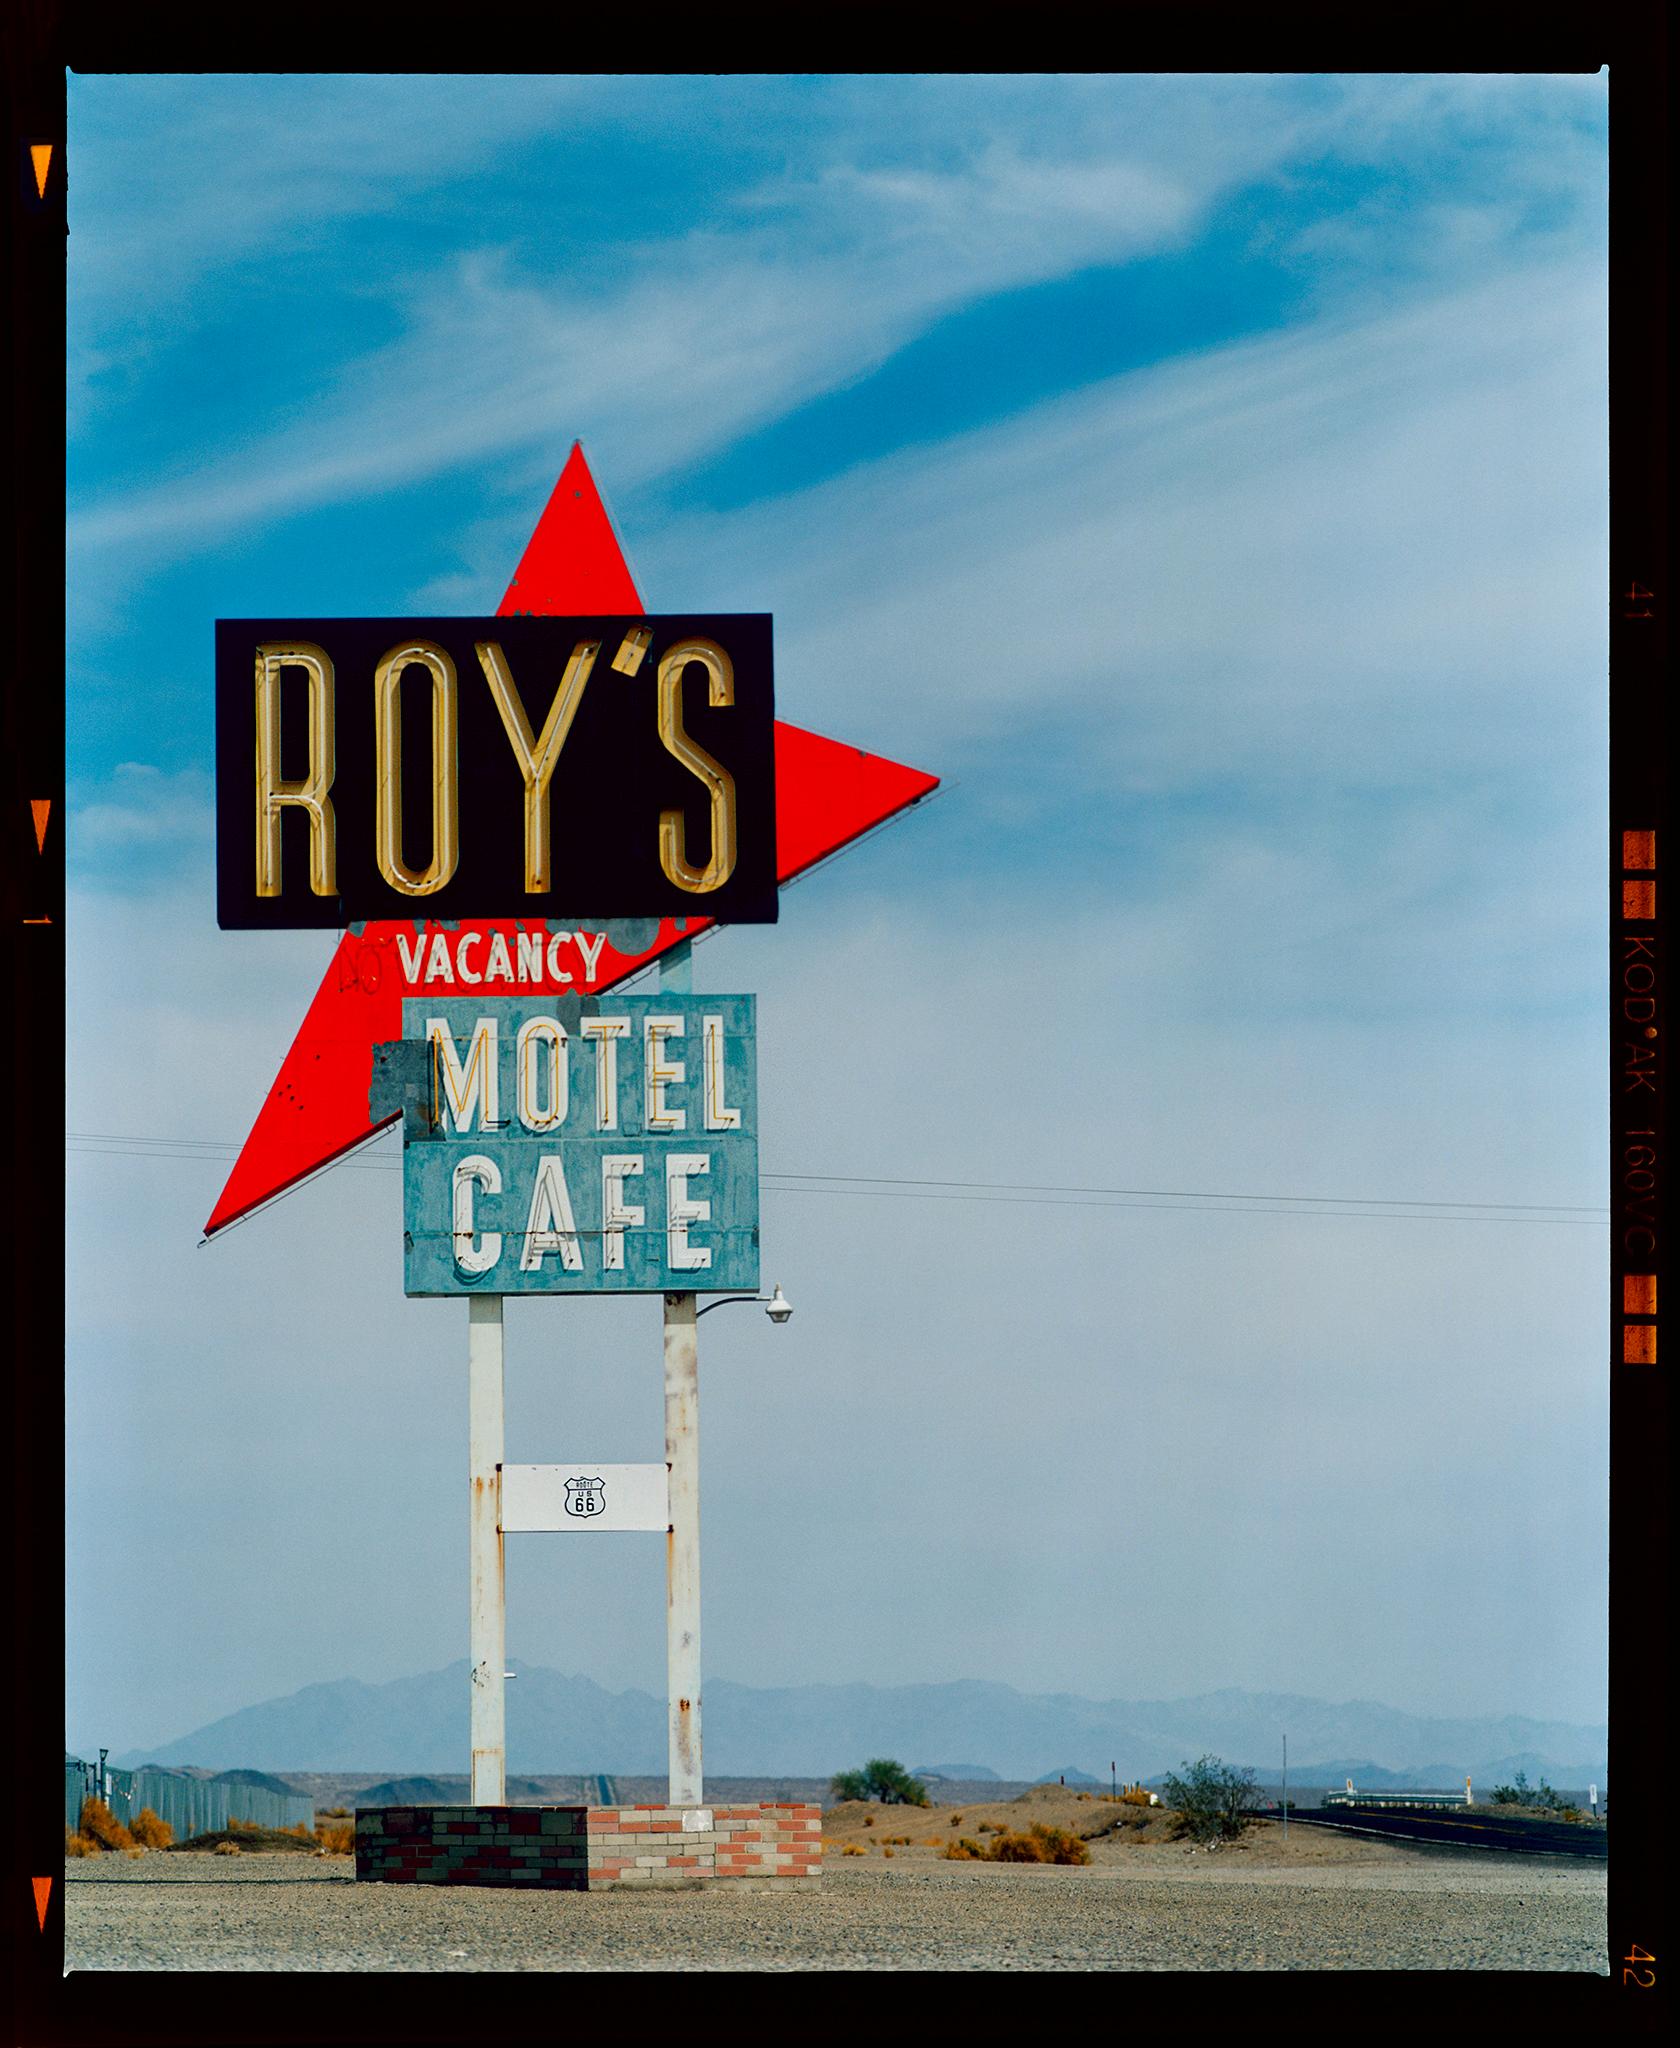 The iconic Googie Roy's Motel sign on the famous Route 66 which is the backdrop to some of the best American road trips. Photograph by Richard Heeps as part of his Dream in Colour series and is one of his many roadside sign photographs.

This